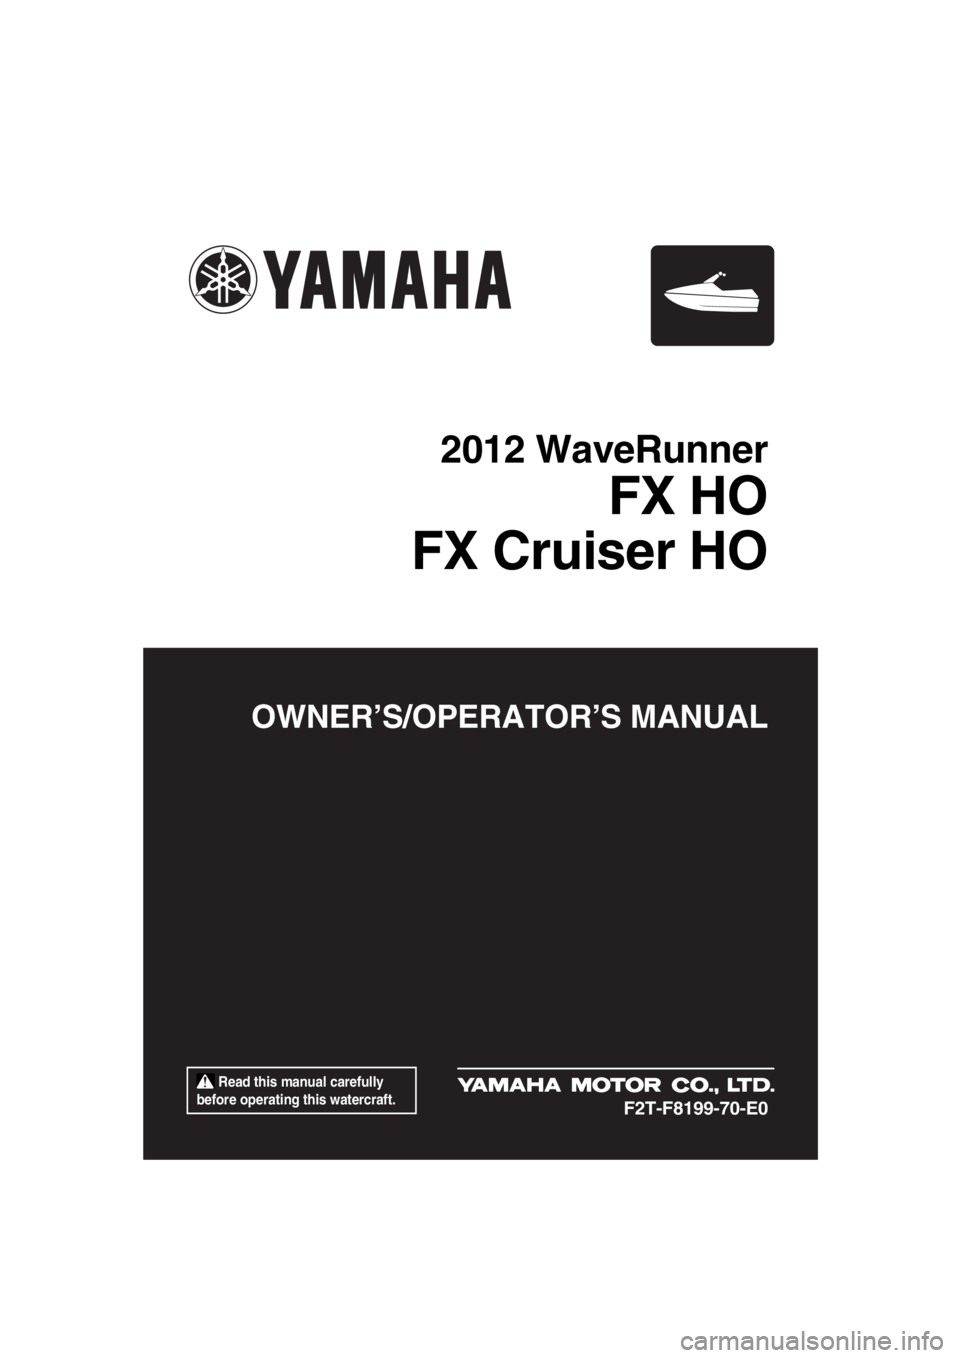 YAMAHA FX HO 2012  Owners Manual  Read this manual carefully 
before operating this watercraft.
OWNER’S/OPERATOR’S MANUAL
2012 WaveRunner
FX HO
FX Cruiser HO
F2T-F8199-70-E0
UF2T70E0.book  Page 1  Thursday, December 29, 2011  2:1